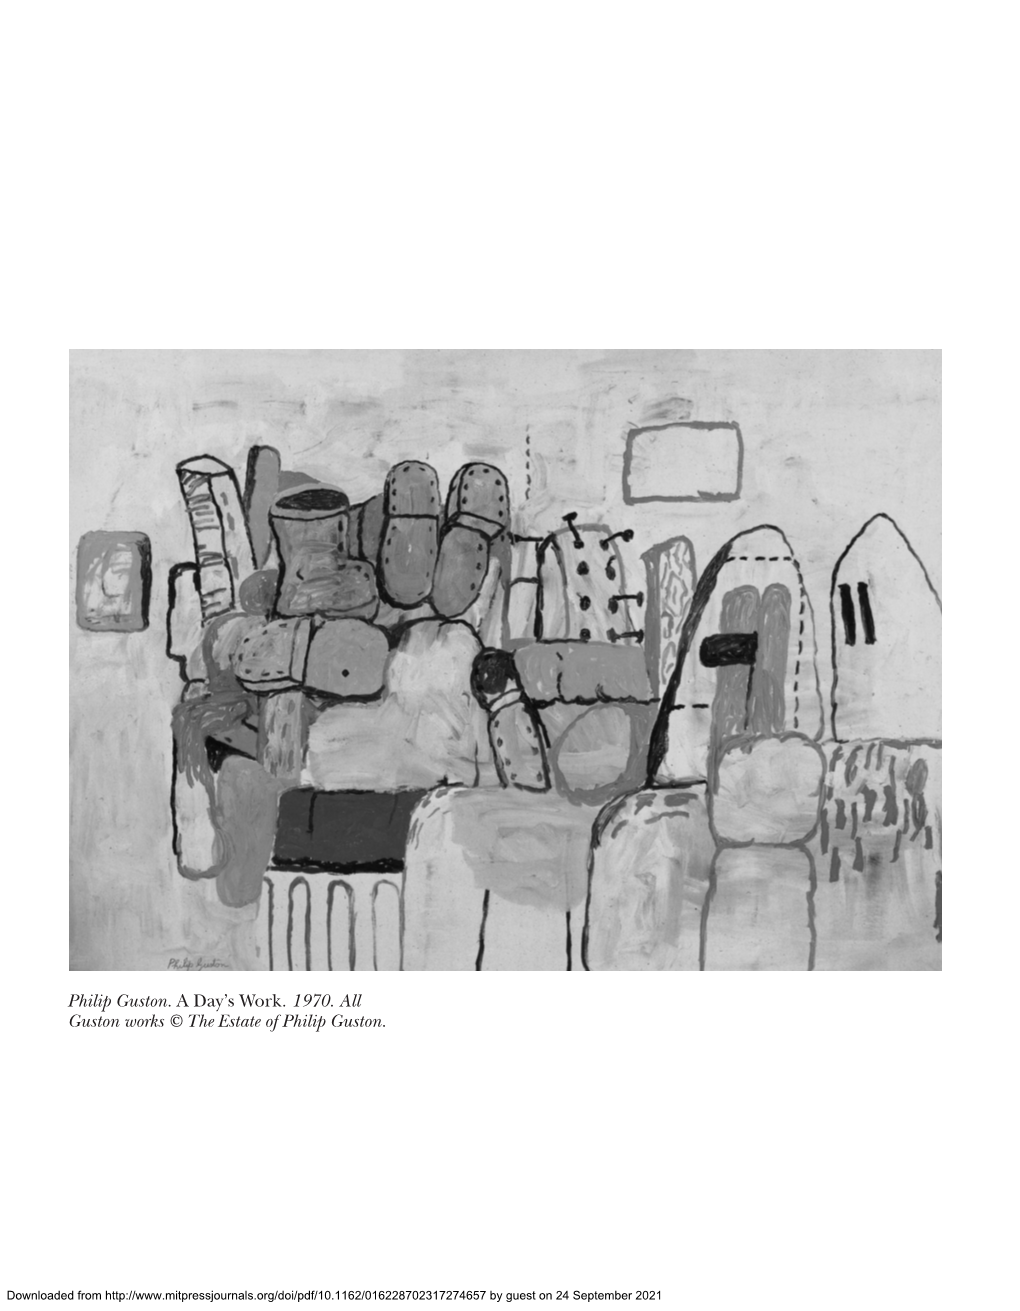 Philip Guston. a Day's Work. 1970. All Guston Works © the Estate of Philip